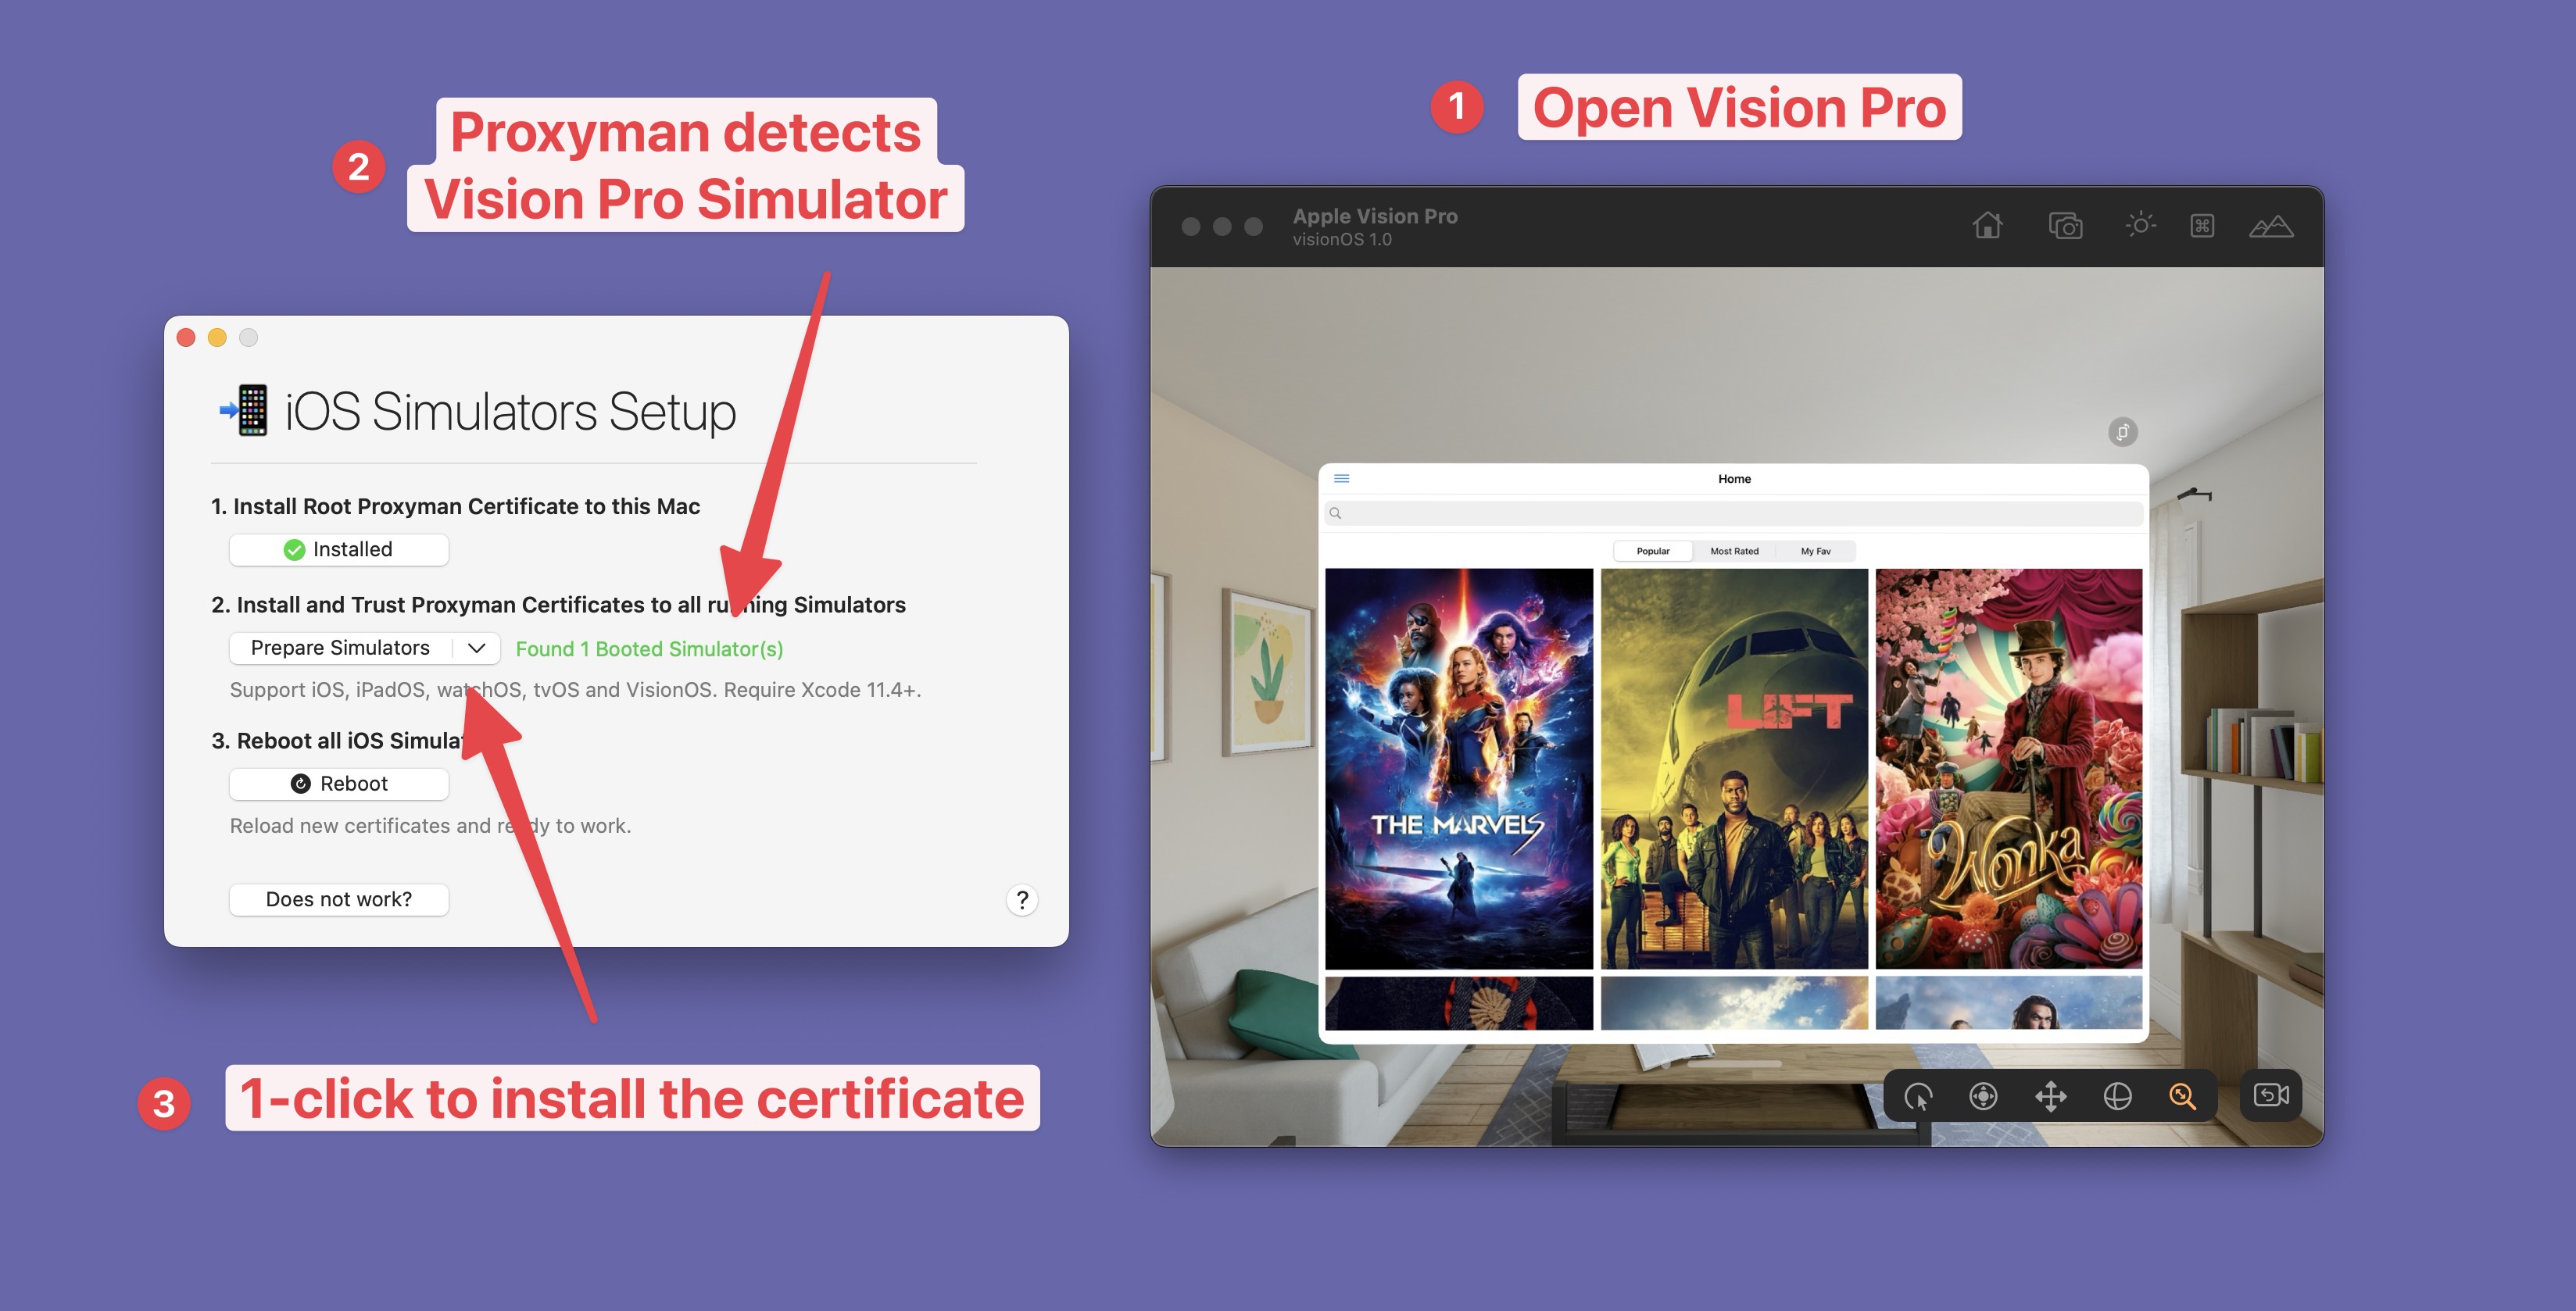 Install and trust Proxyman certificate to VisionPro Simulator